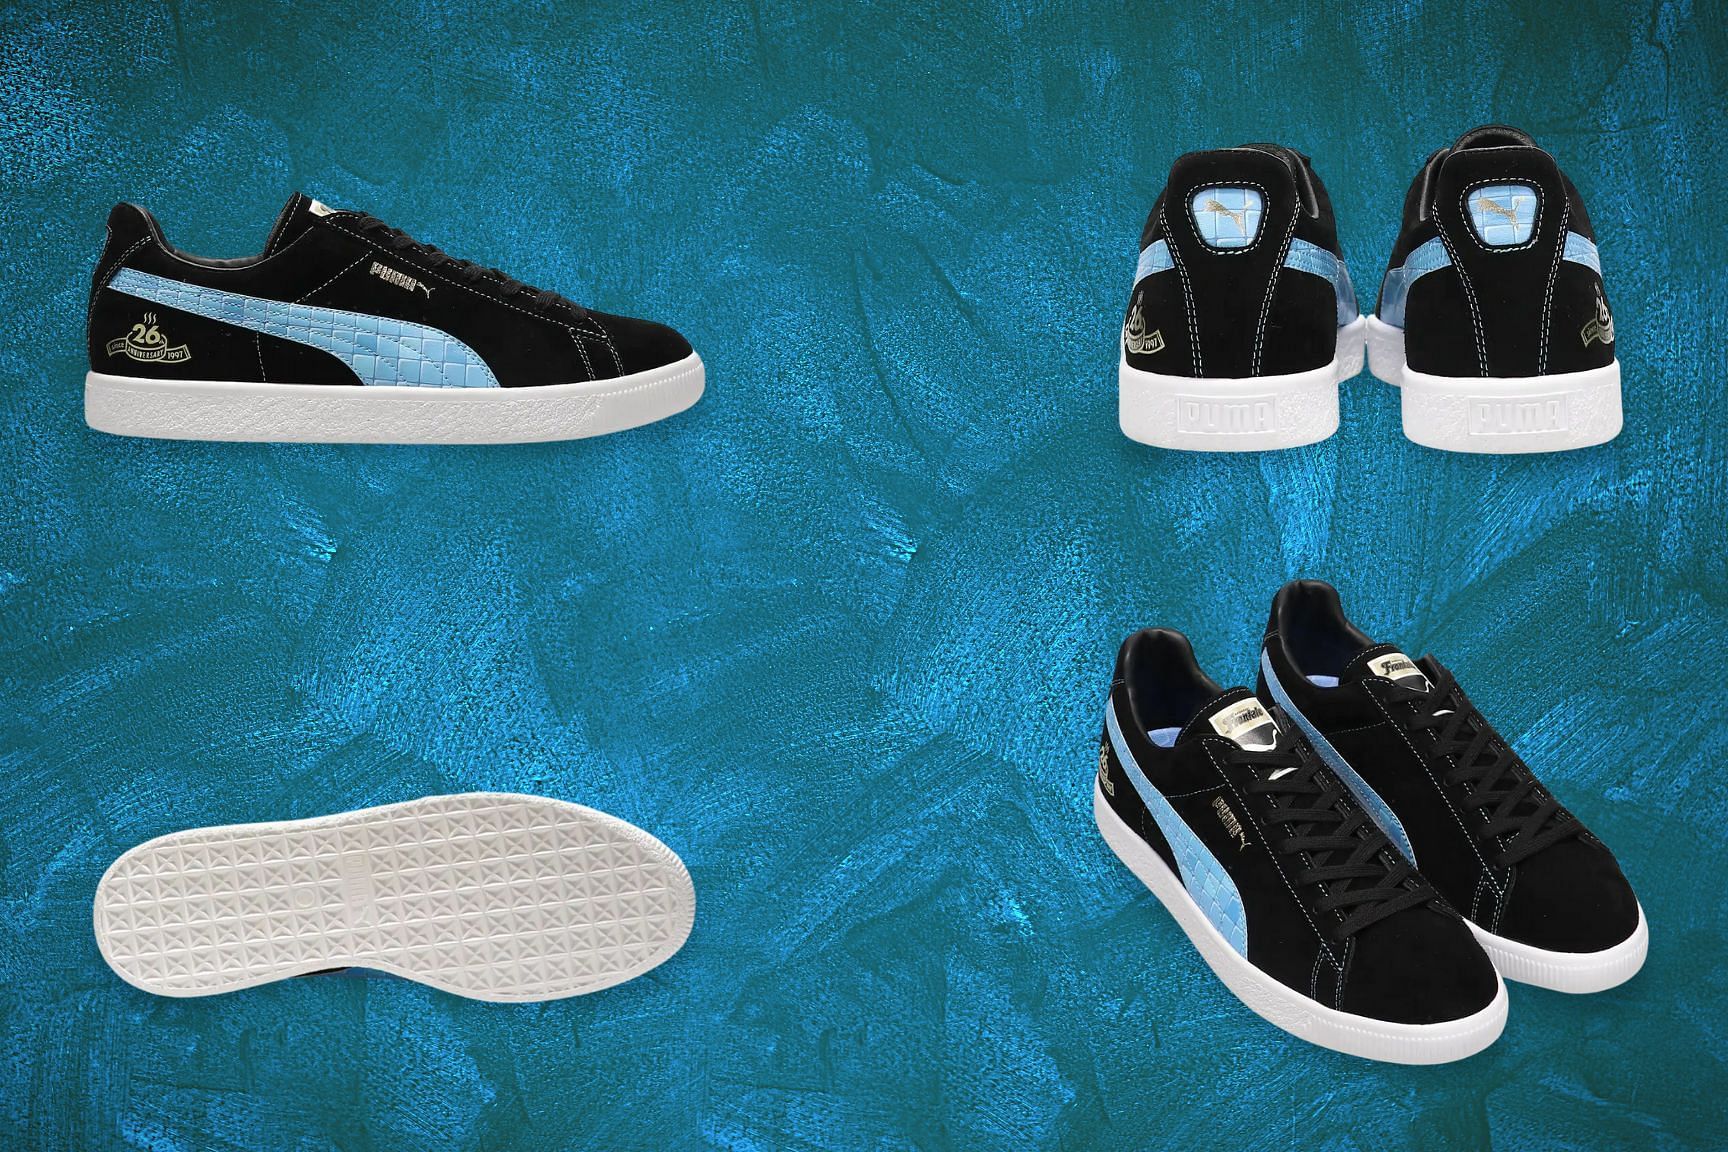 Here&#039;s a detailed look at the newly launched Atmos x Puma Suede x Kawasaki Frontale sneakers (Image via Sportskeeda)